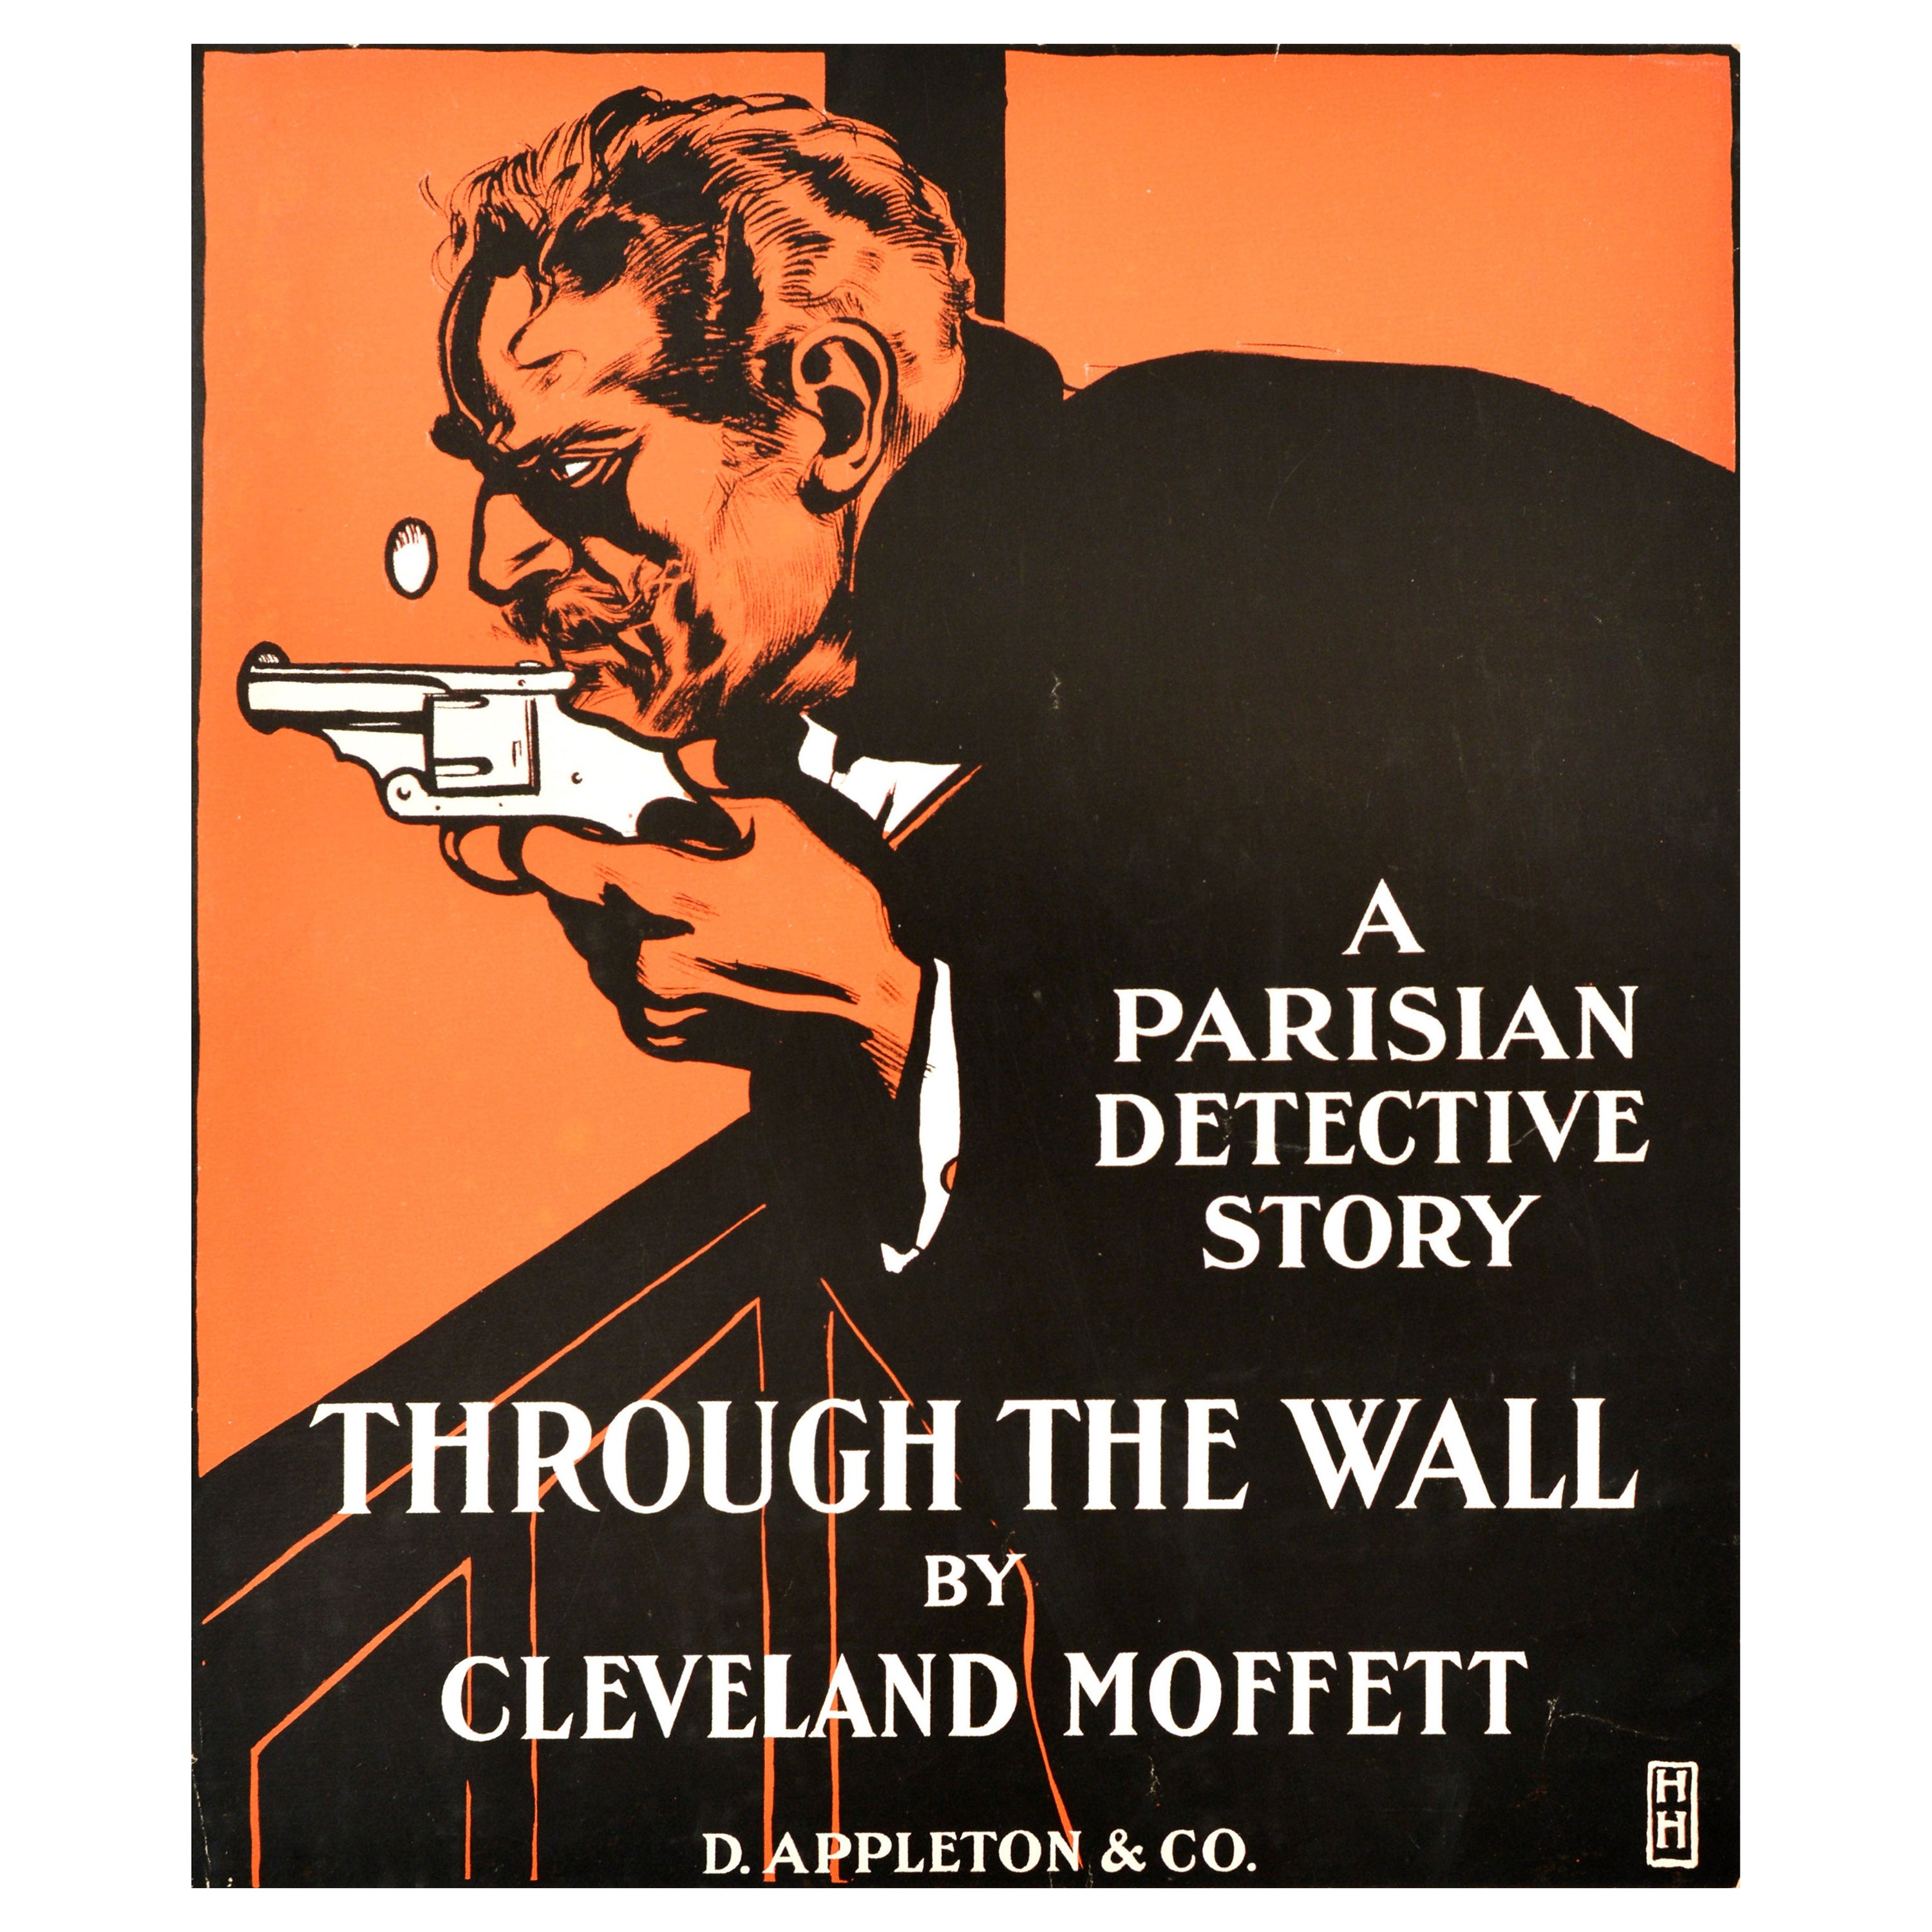 Original Antique Book Advertising Poster Through The Wall Cleveland Moffett For Sale